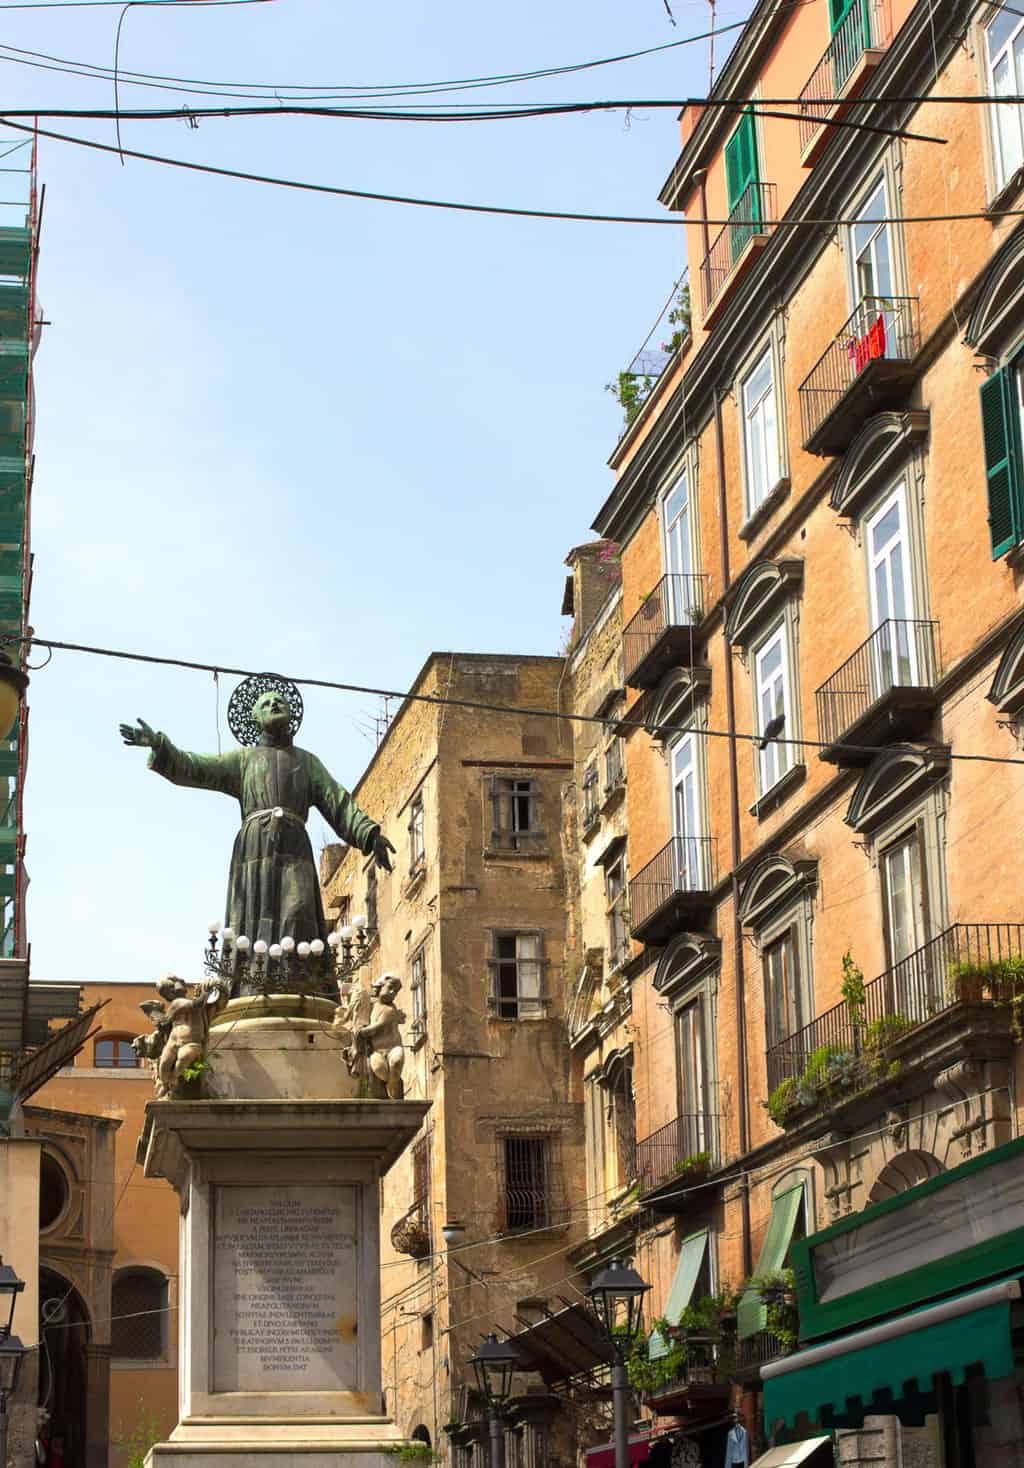 A statue of a saint looking to the sky in Piazza San Gaetano in Via dei Tribunali in Naples. 